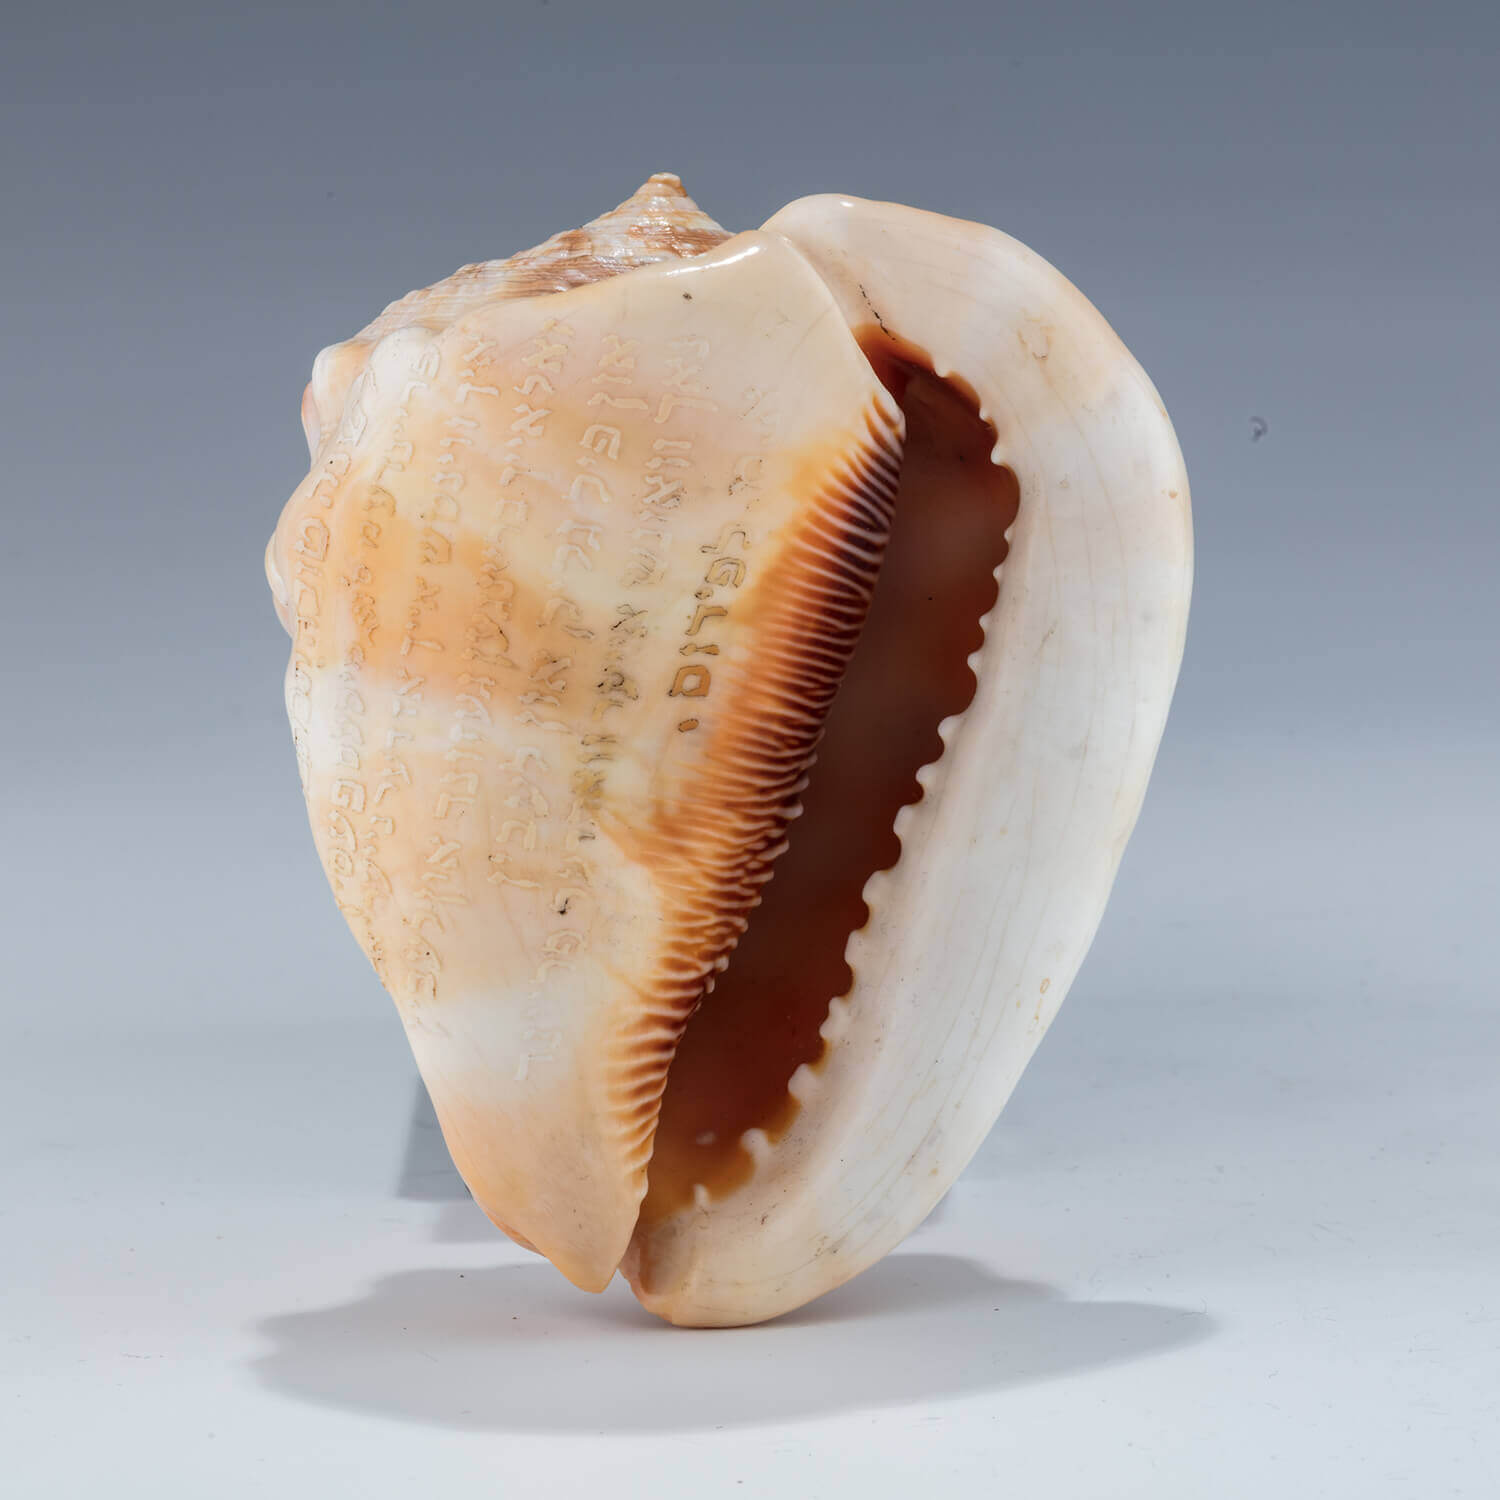 022. A RARE CARVED CONCH SHELL